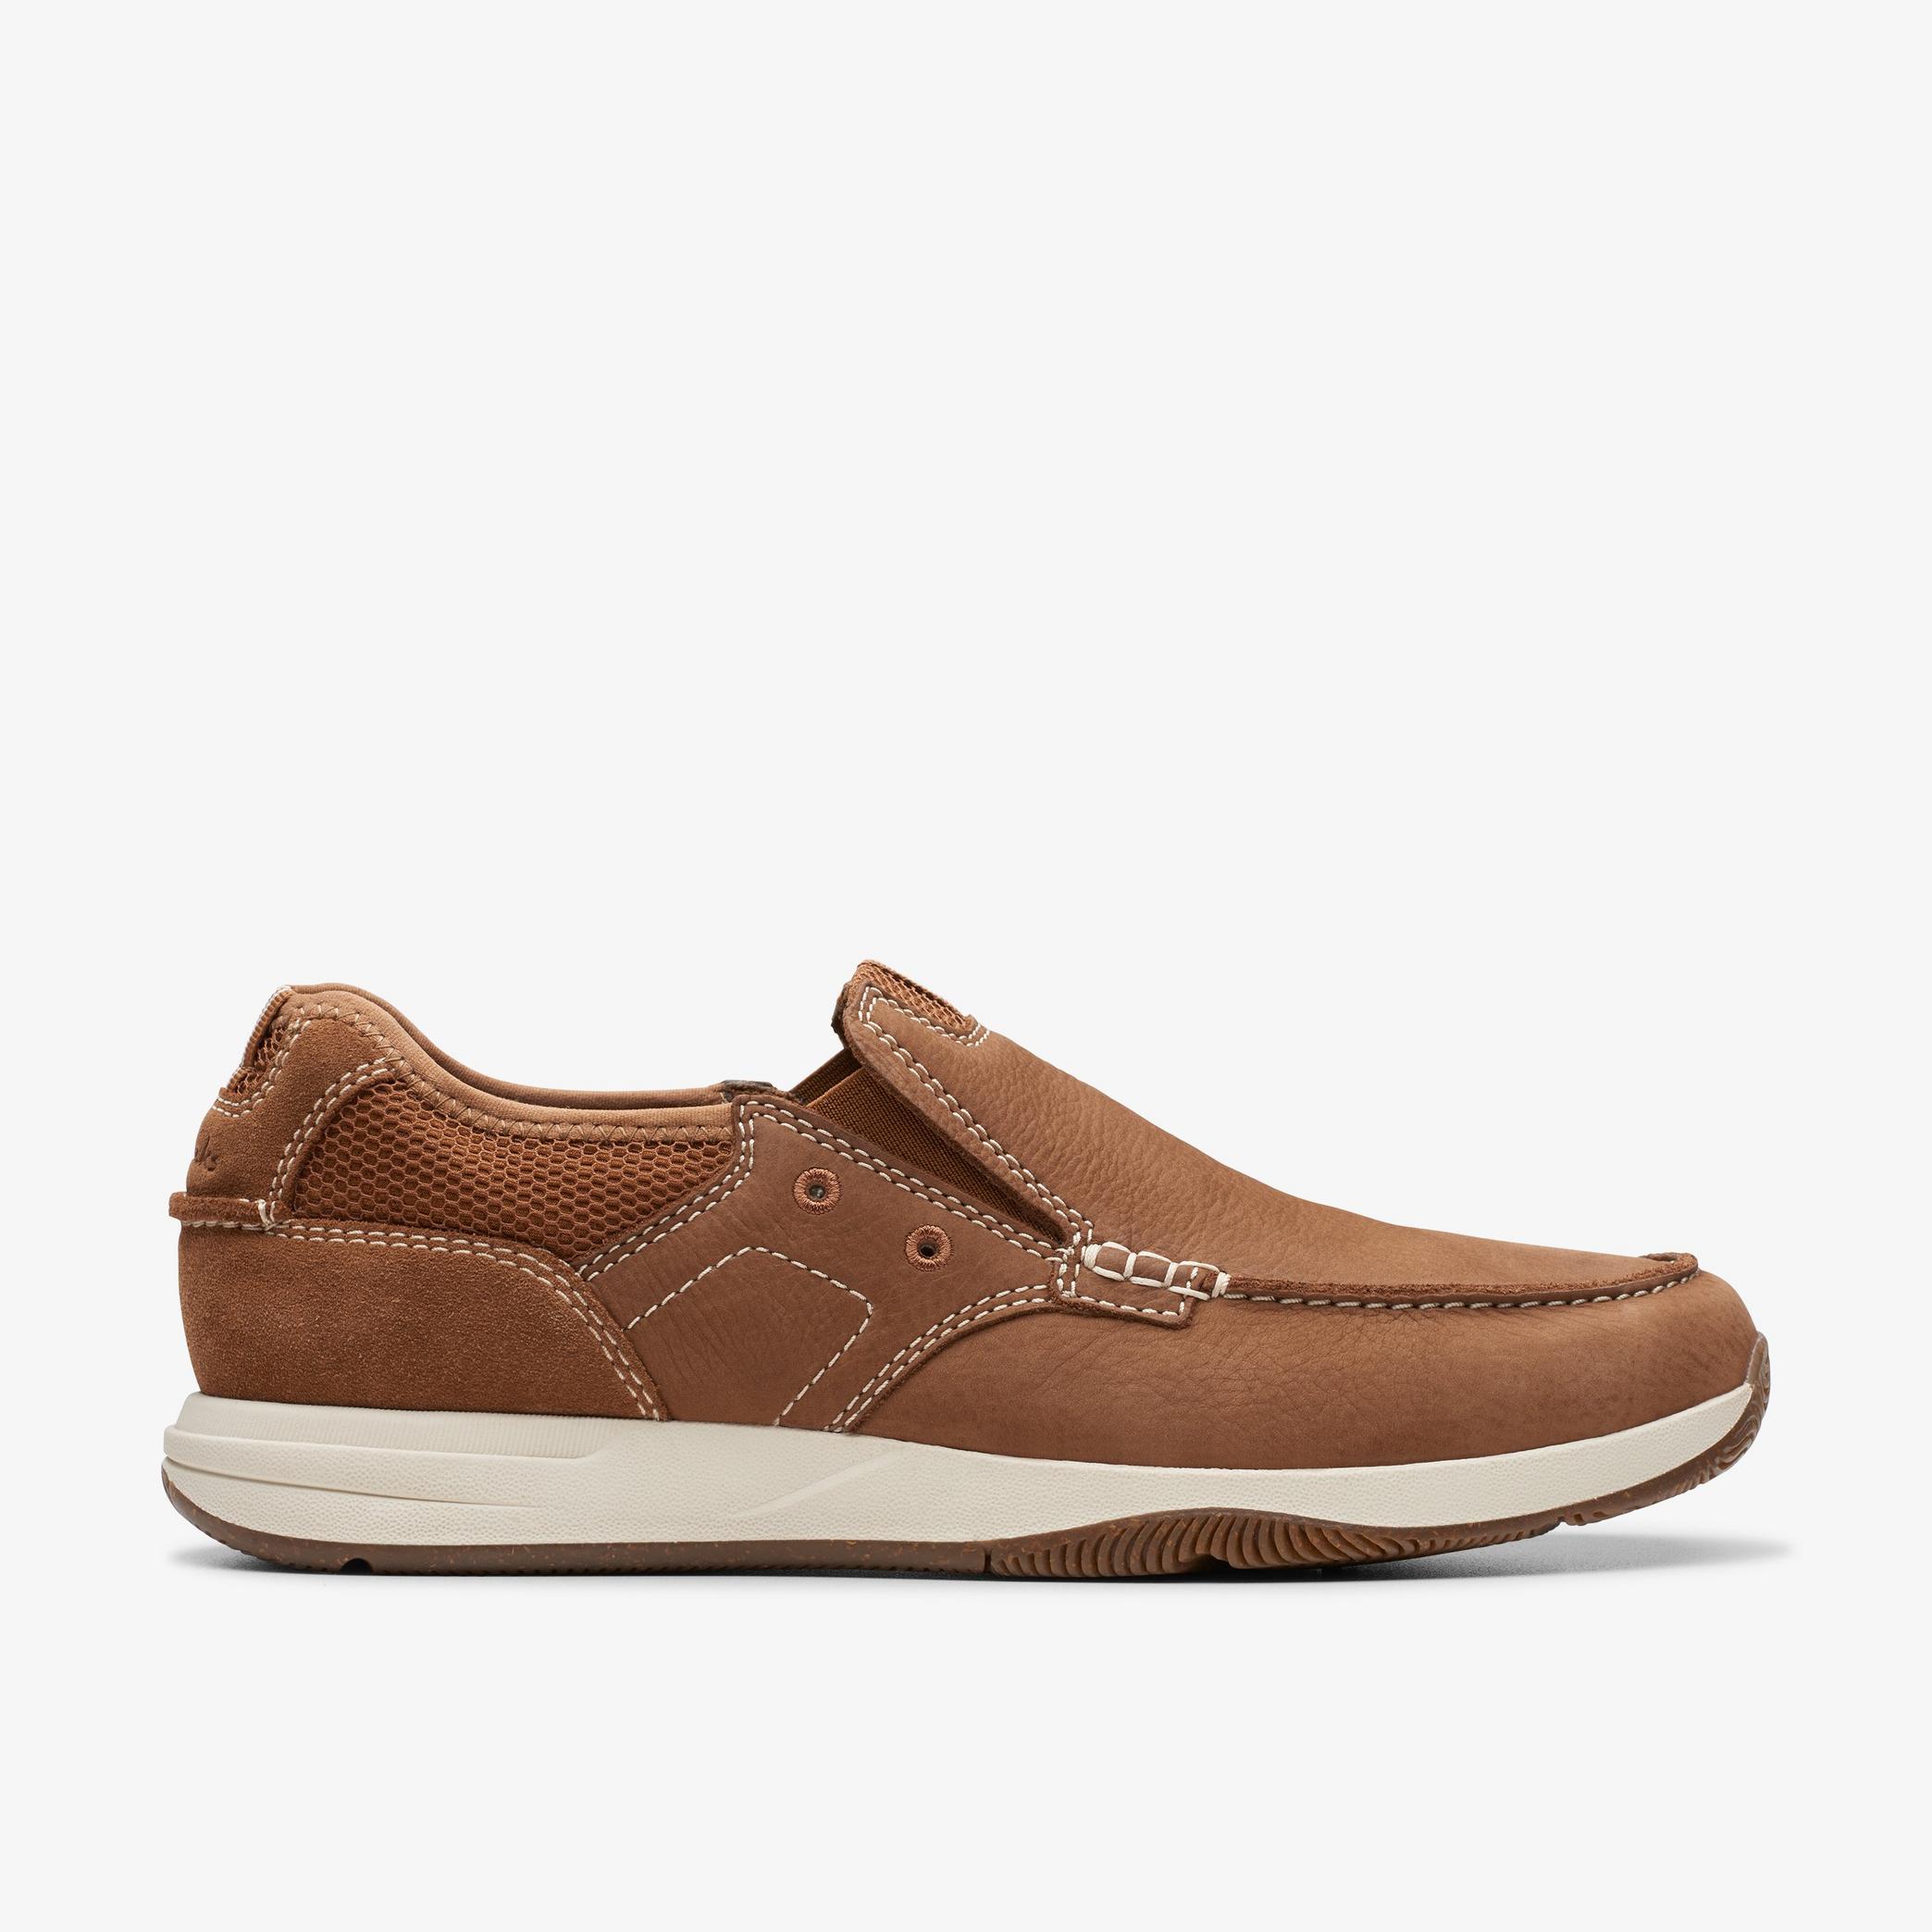 Sailview Step Light Tan Nubuck Boat Shoes, view 1 of 6